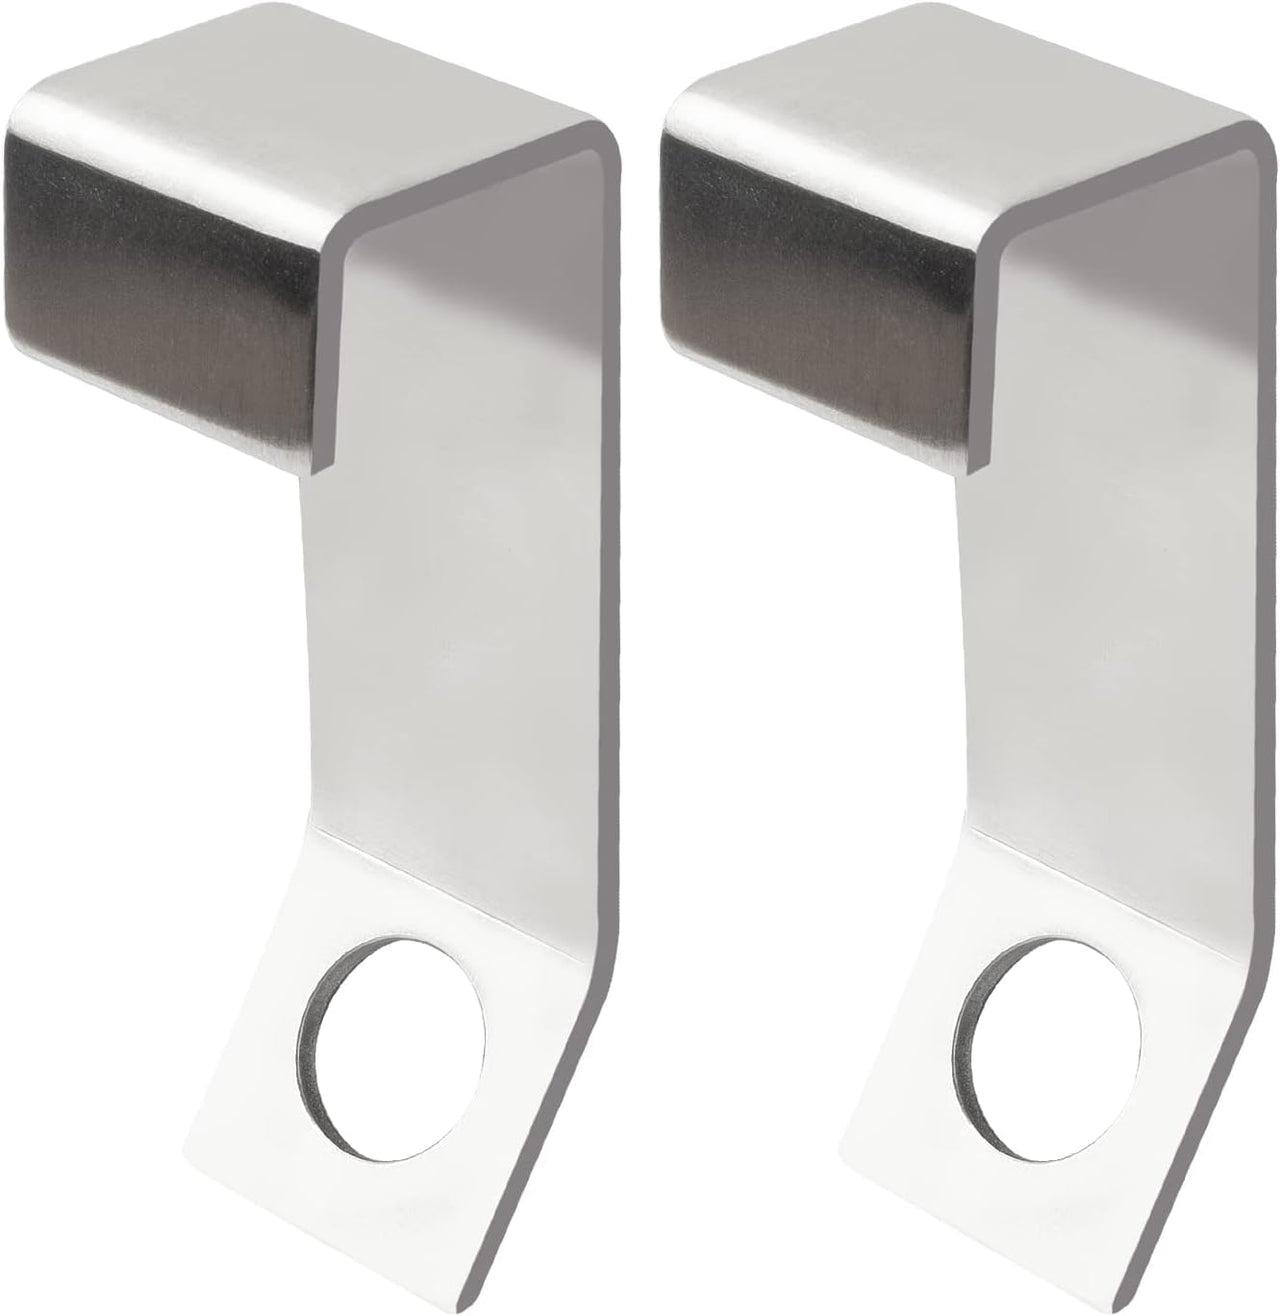 Cooler Lock Bracket. 2 Pack. Compatible with Yeti/RTIC Coolers. Tie Down Kit Made of Premium Stainless Steel